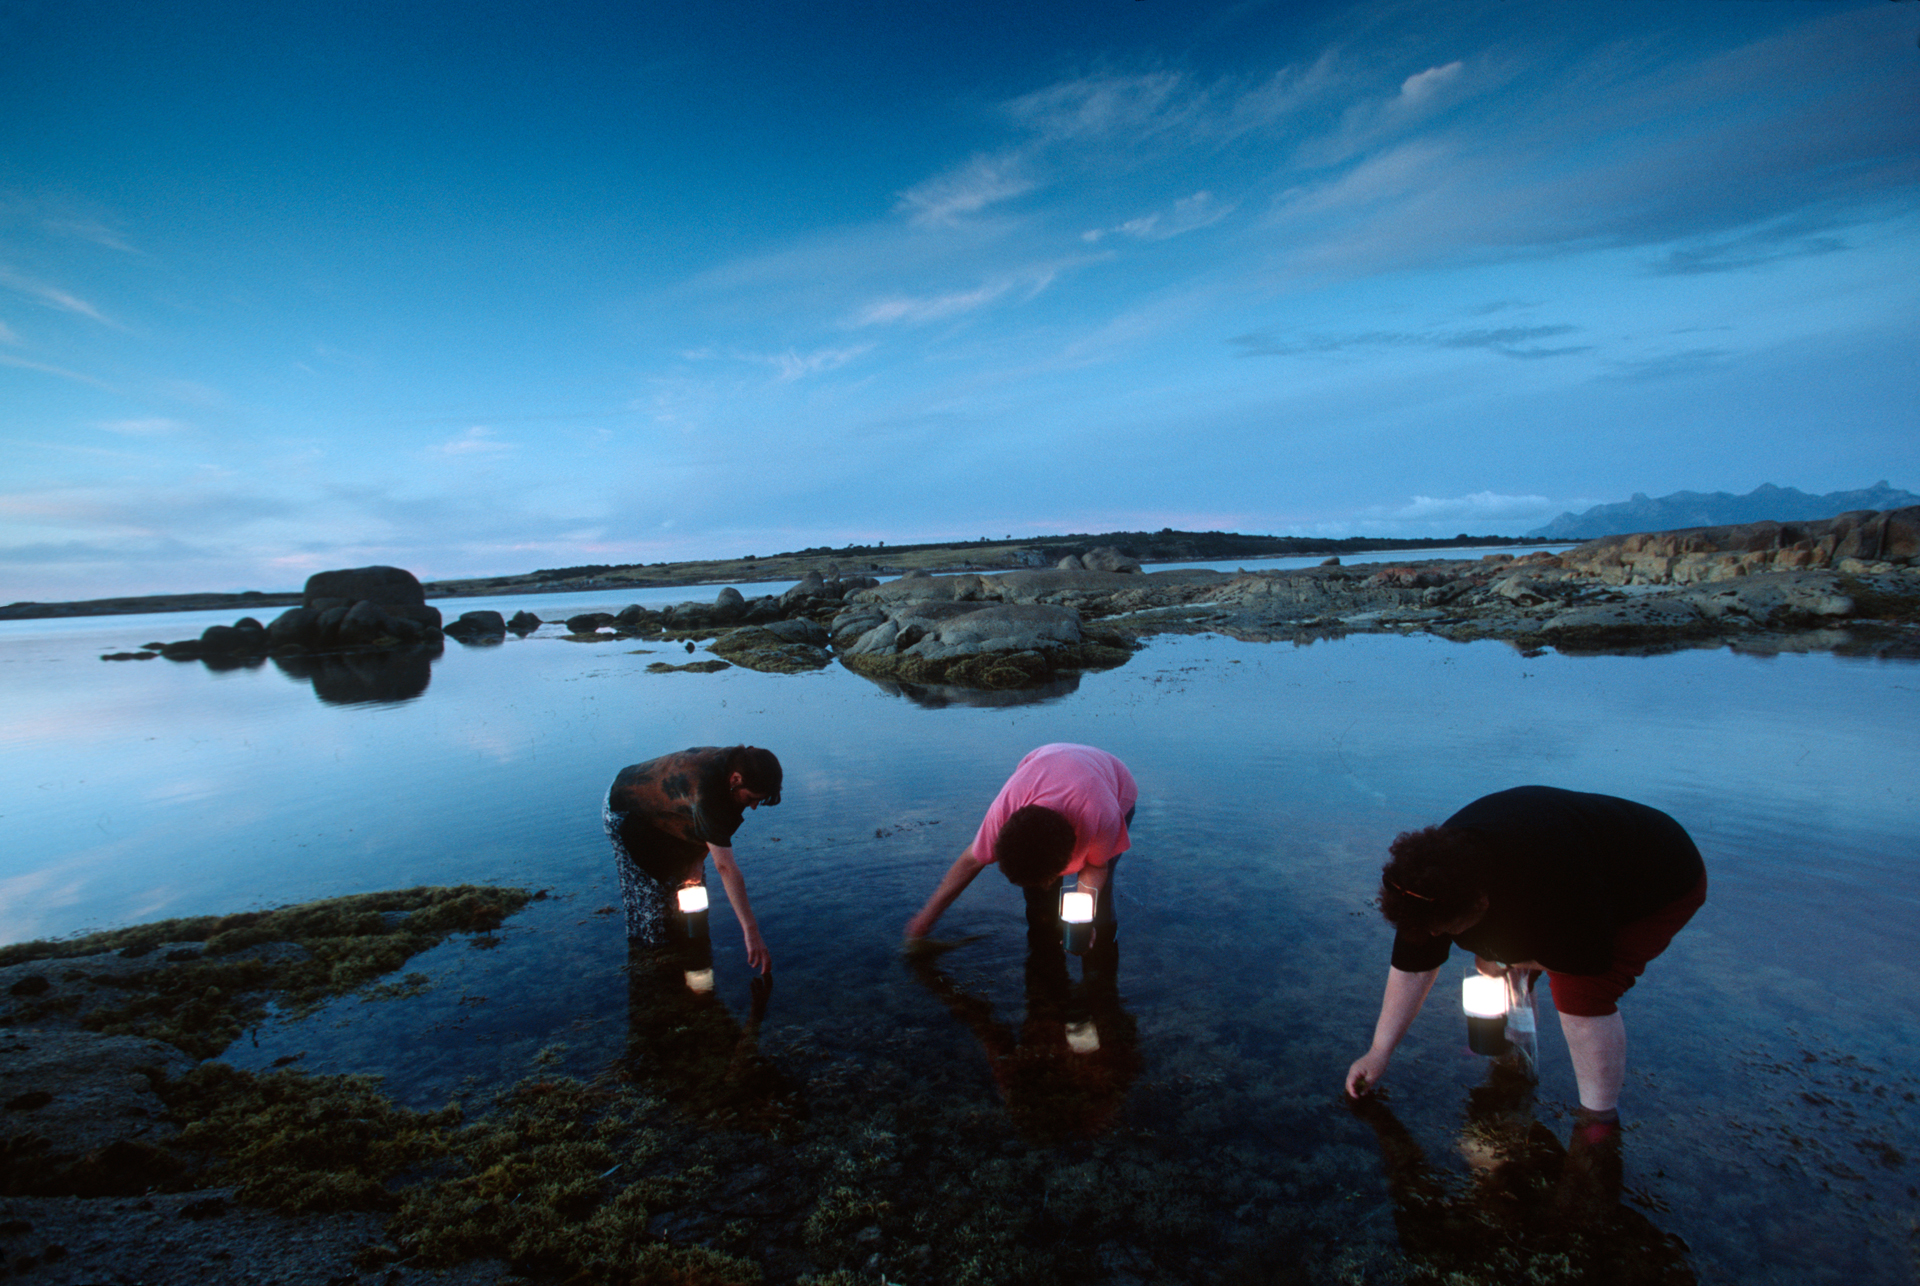  With handheld lamps atdusk, aboriginal artist Lola Greeno and two of her friends collect tiny seashells for traditional aboriginal necklaces.  Cape Barren Island  